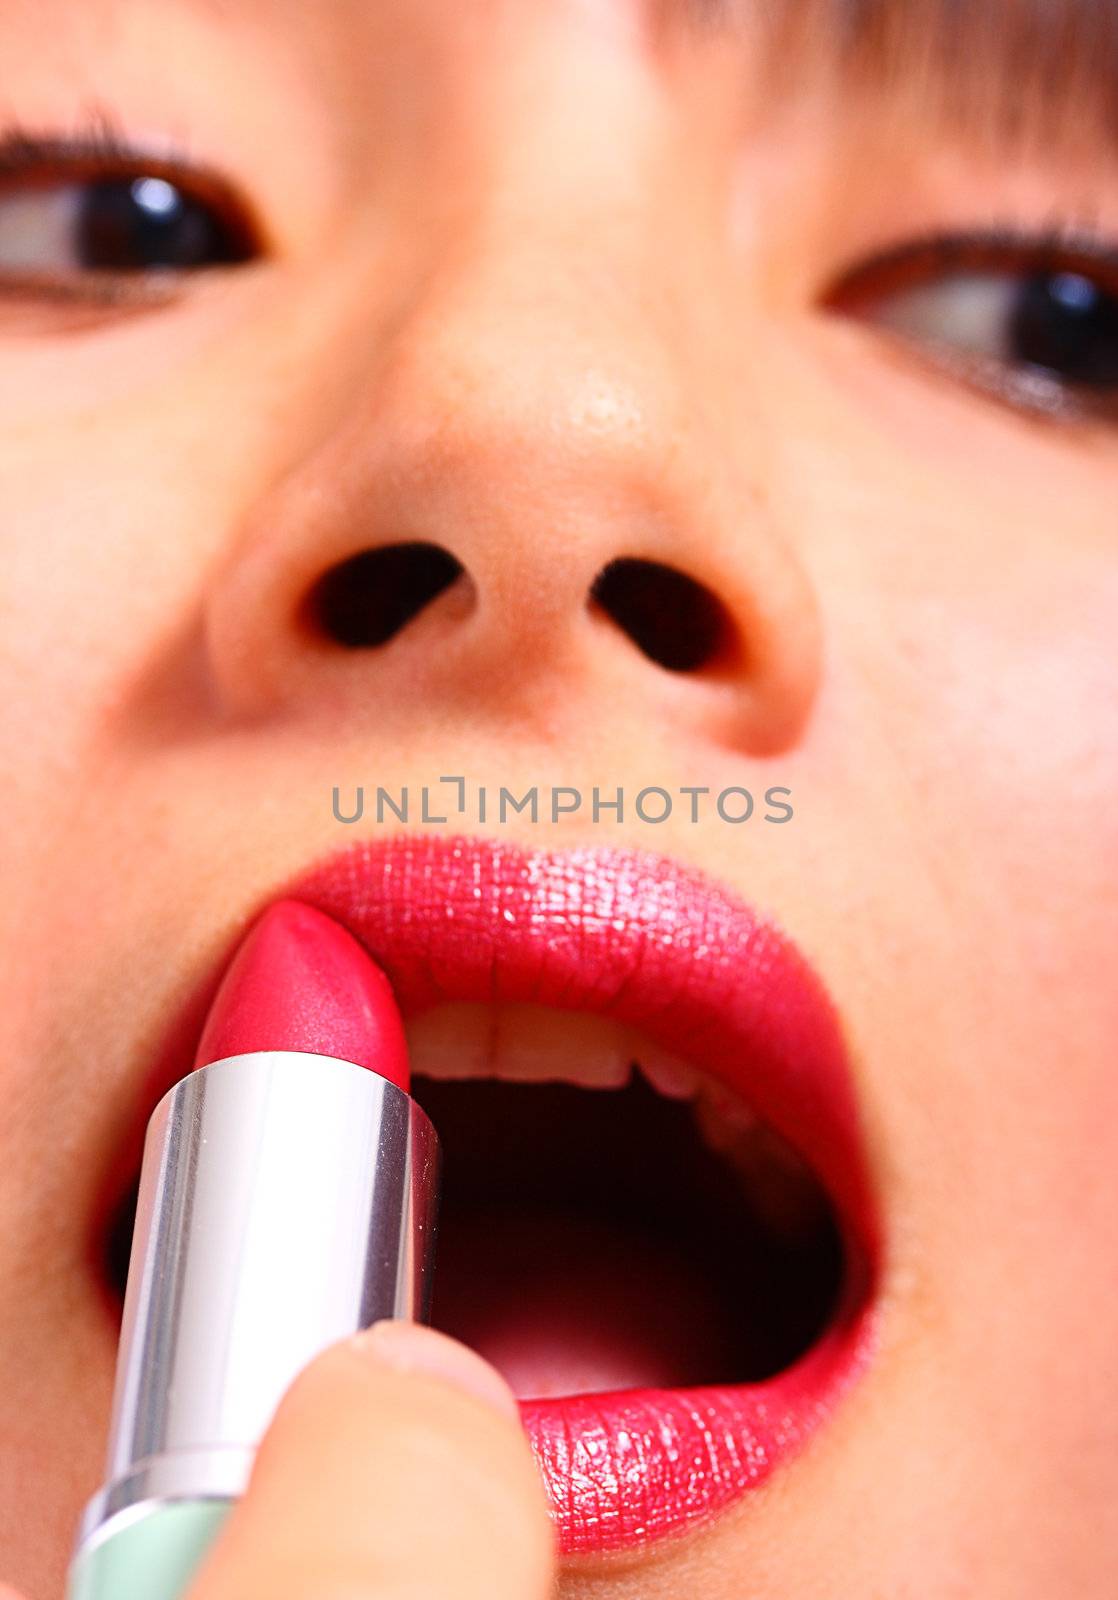 Woman Adding Finishing Touches To Her Make Up By Applying Lipstick